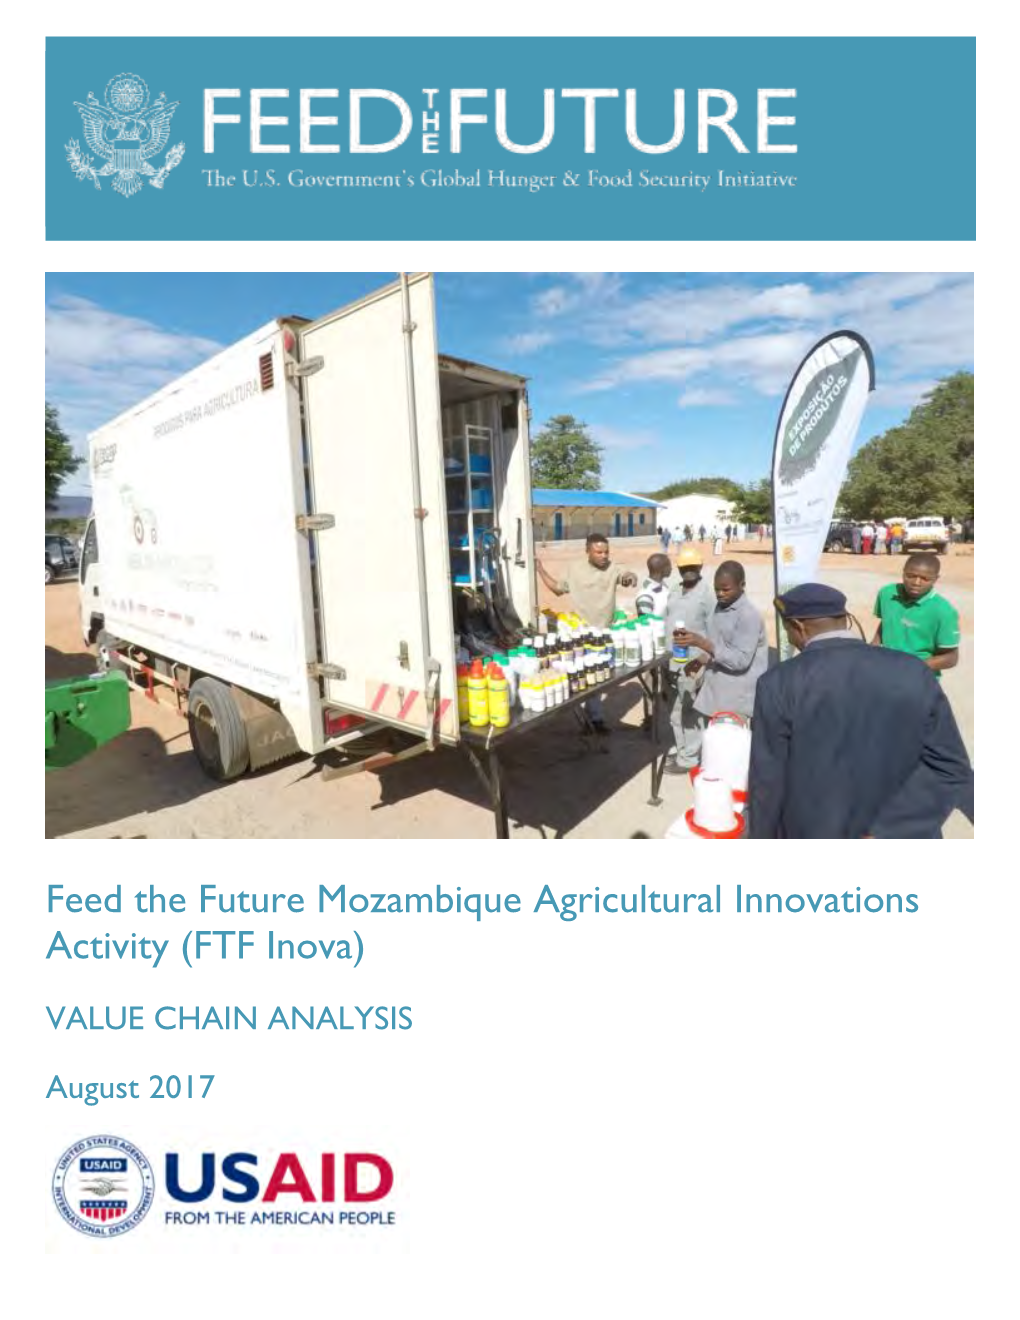 Feed the Future Mozambique Agricultural Innovations Activity (FTF Inova)